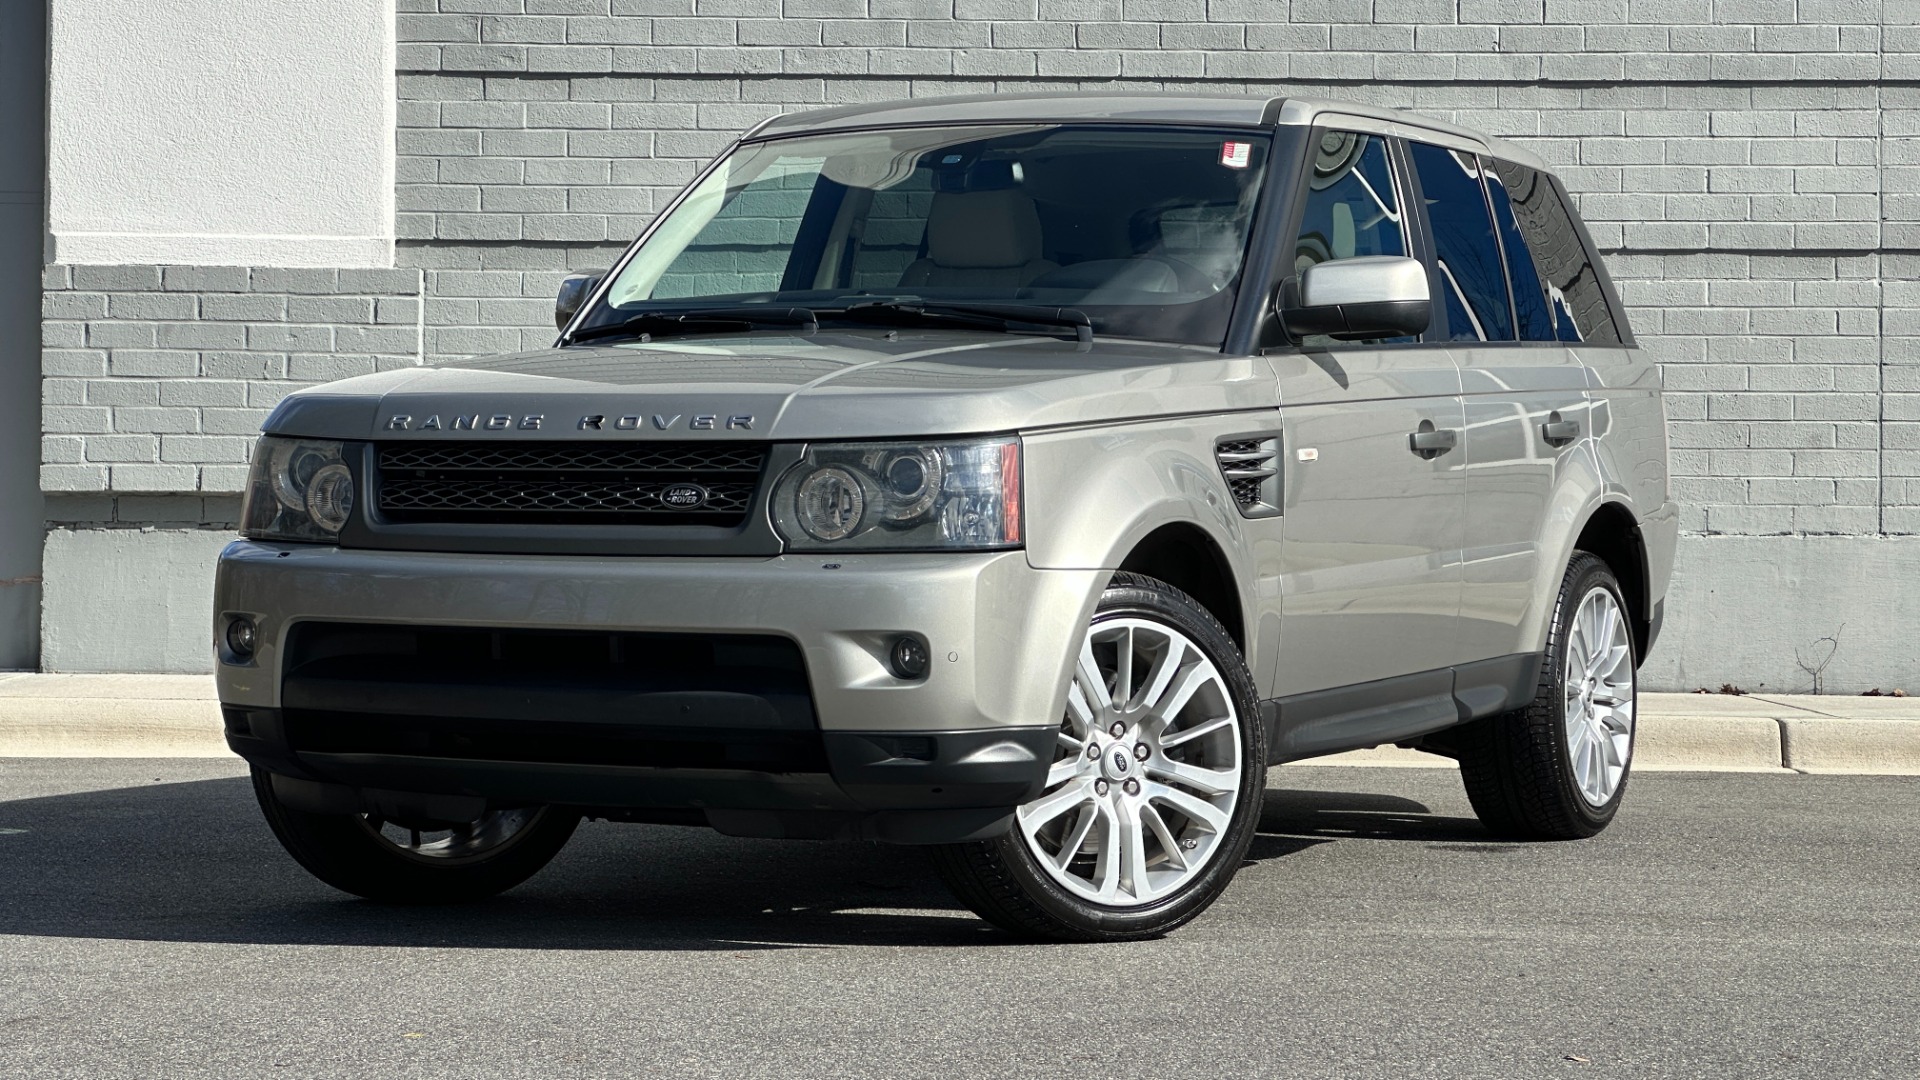 Used 2010 Land Rover Range Rover Sport HSE LUX / EXTENDED LEATHER / LUXURY INTERIOR PKG / REAR ENTERTAINMENT for sale $14,995 at Formula Imports in Charlotte NC 28227 1